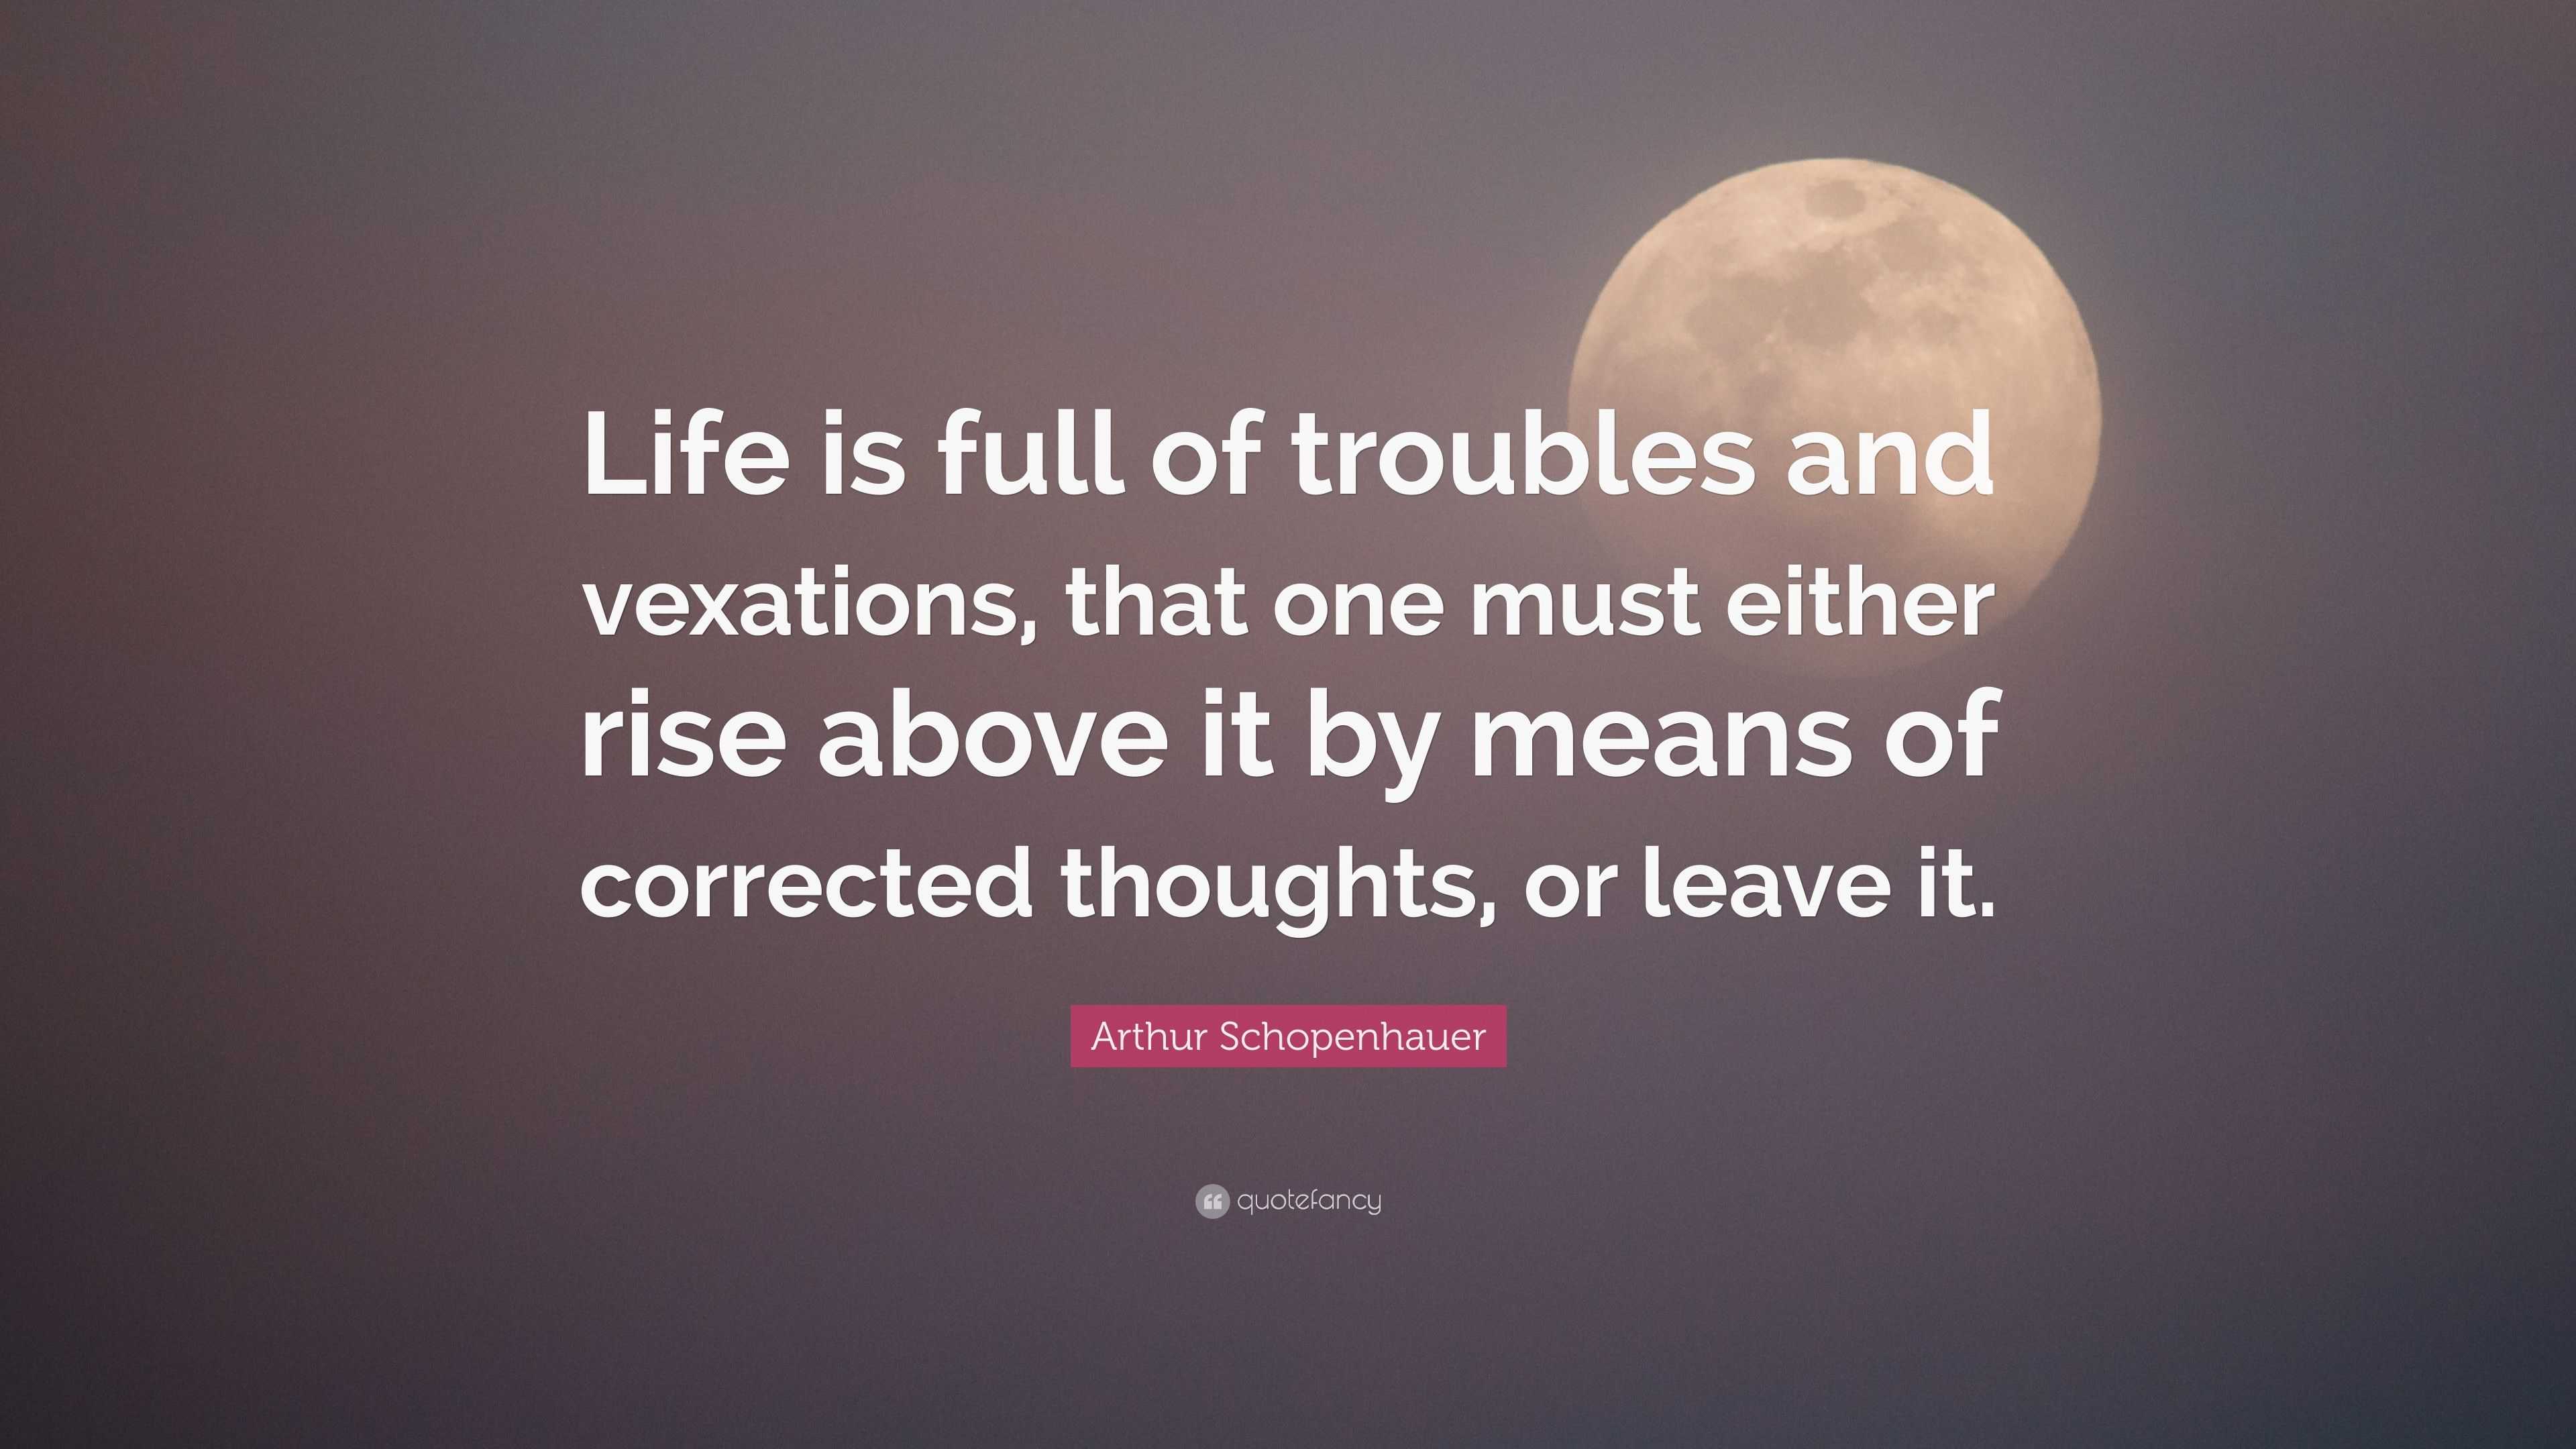 Arthur Schopenhauer Quote: “Life is full of troubles and vexations ...